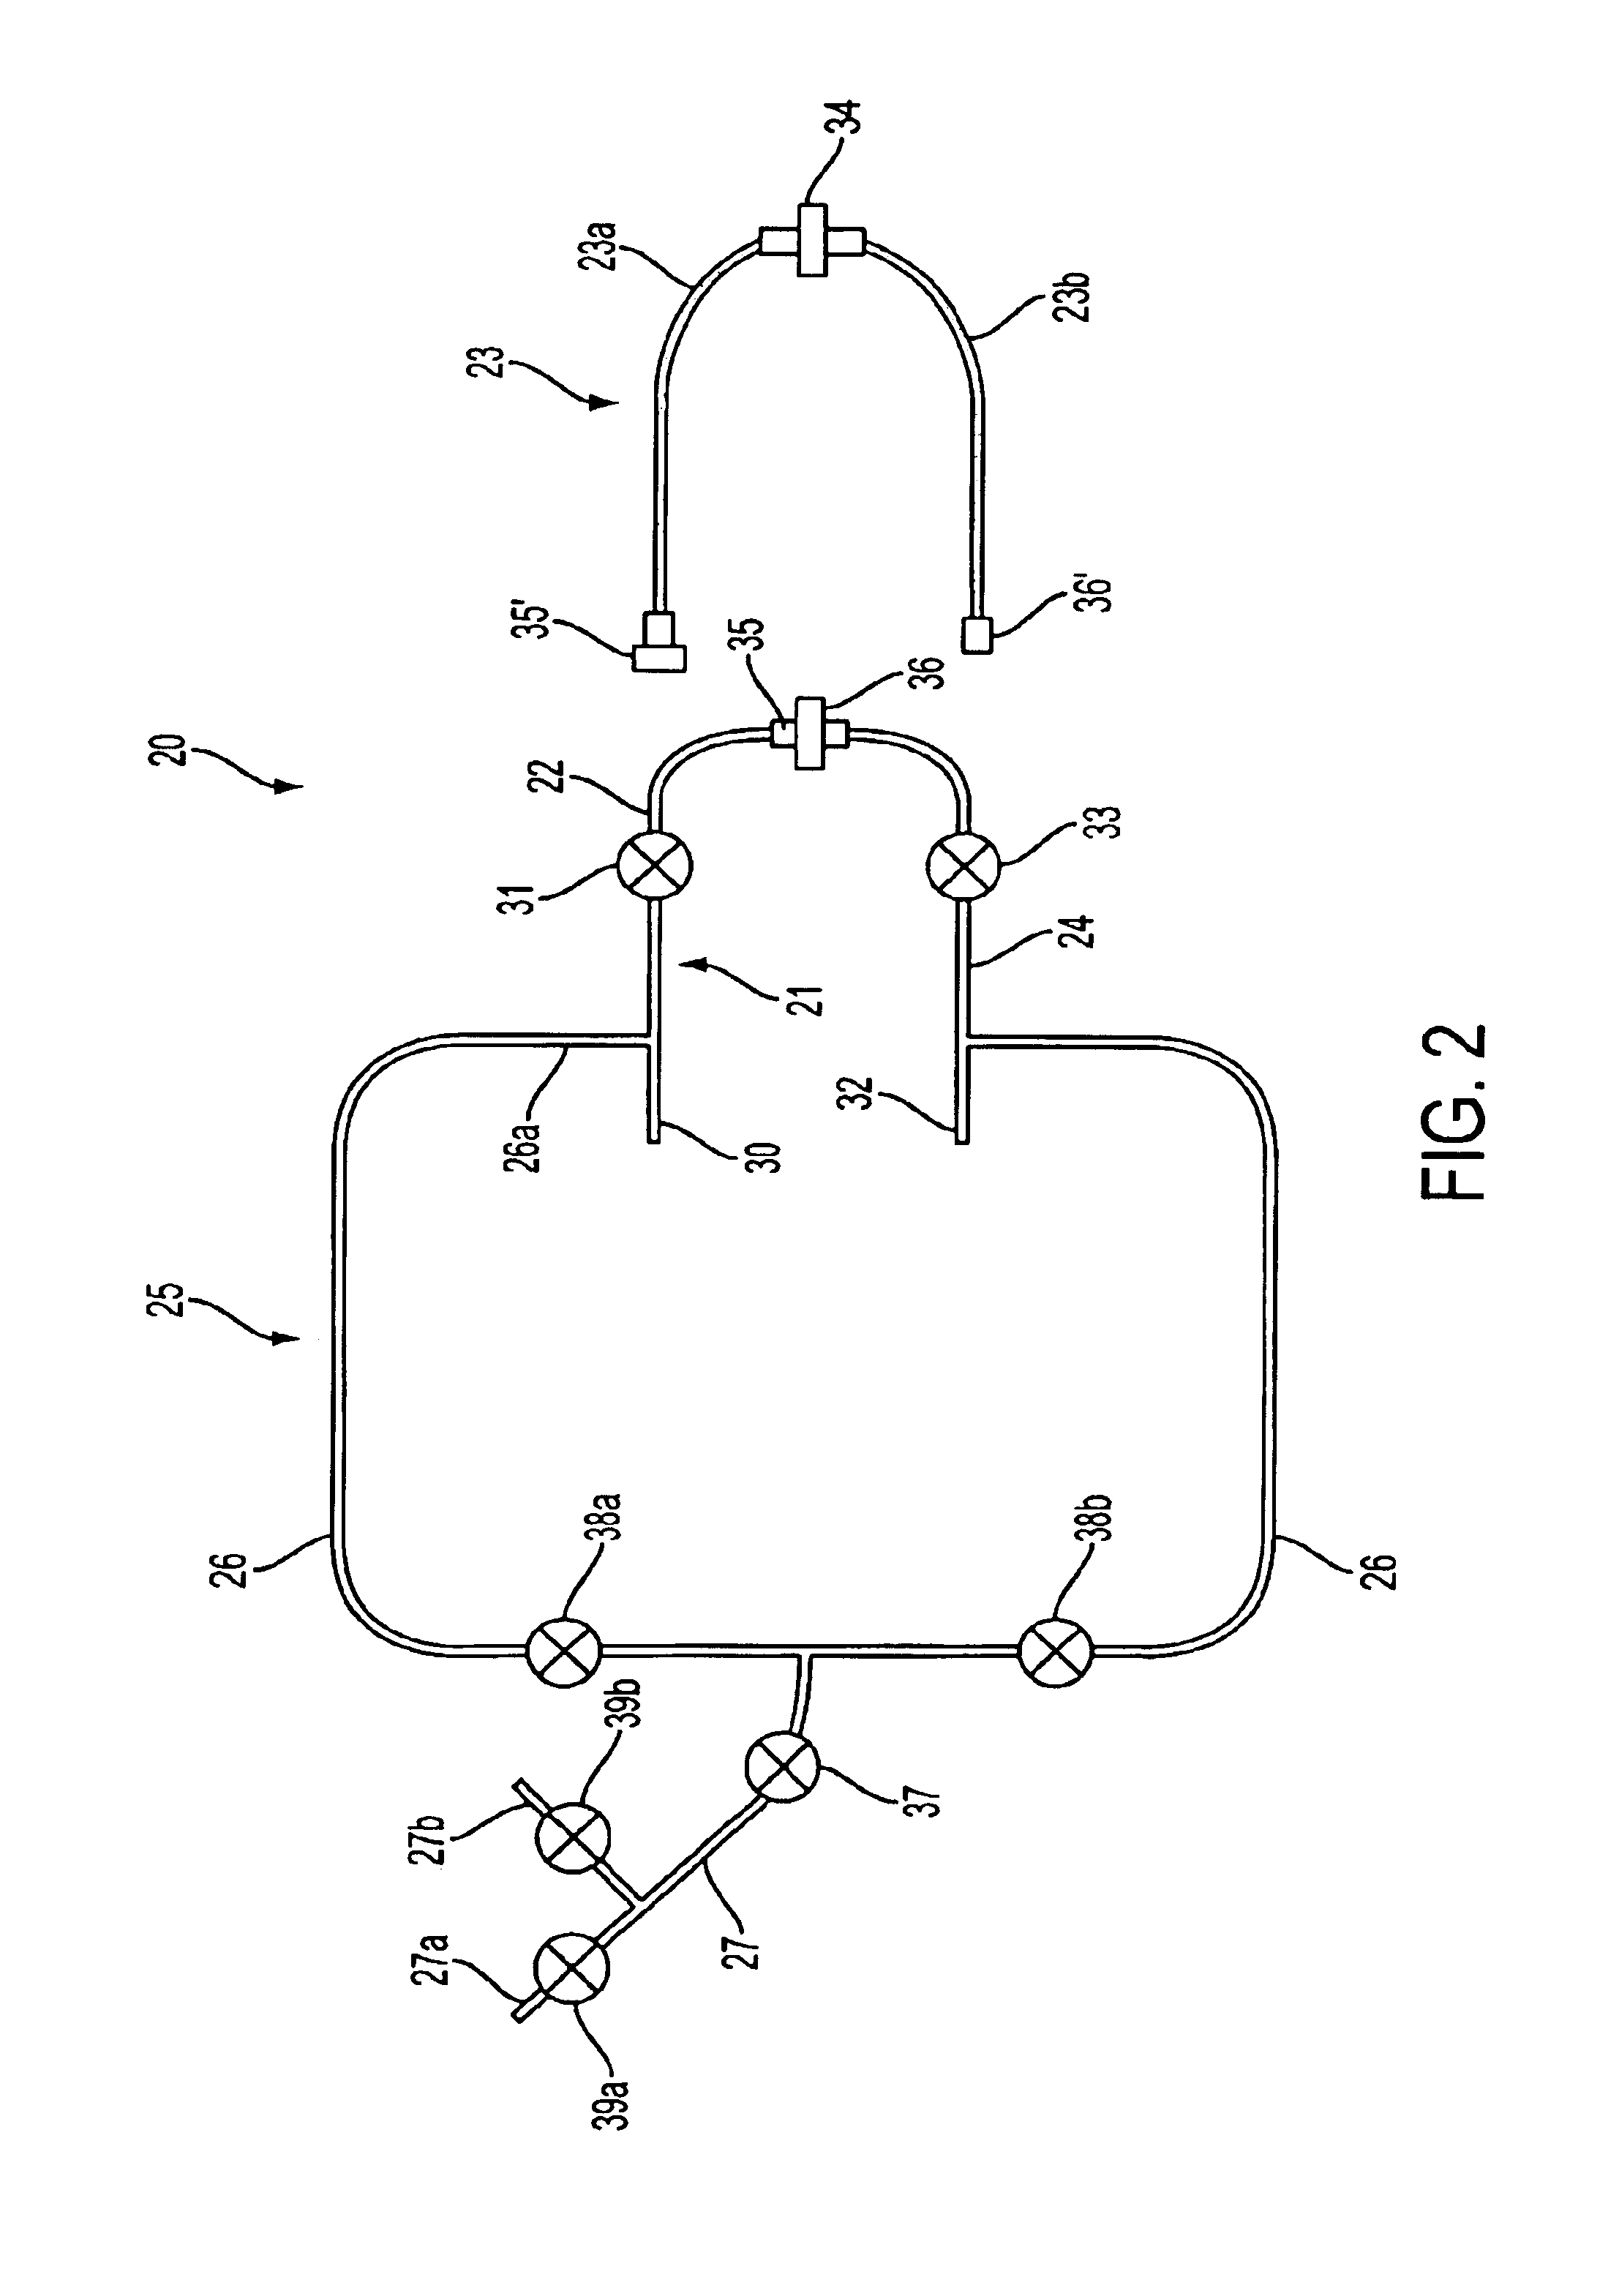 Tubing set for blood handling system and methods of use